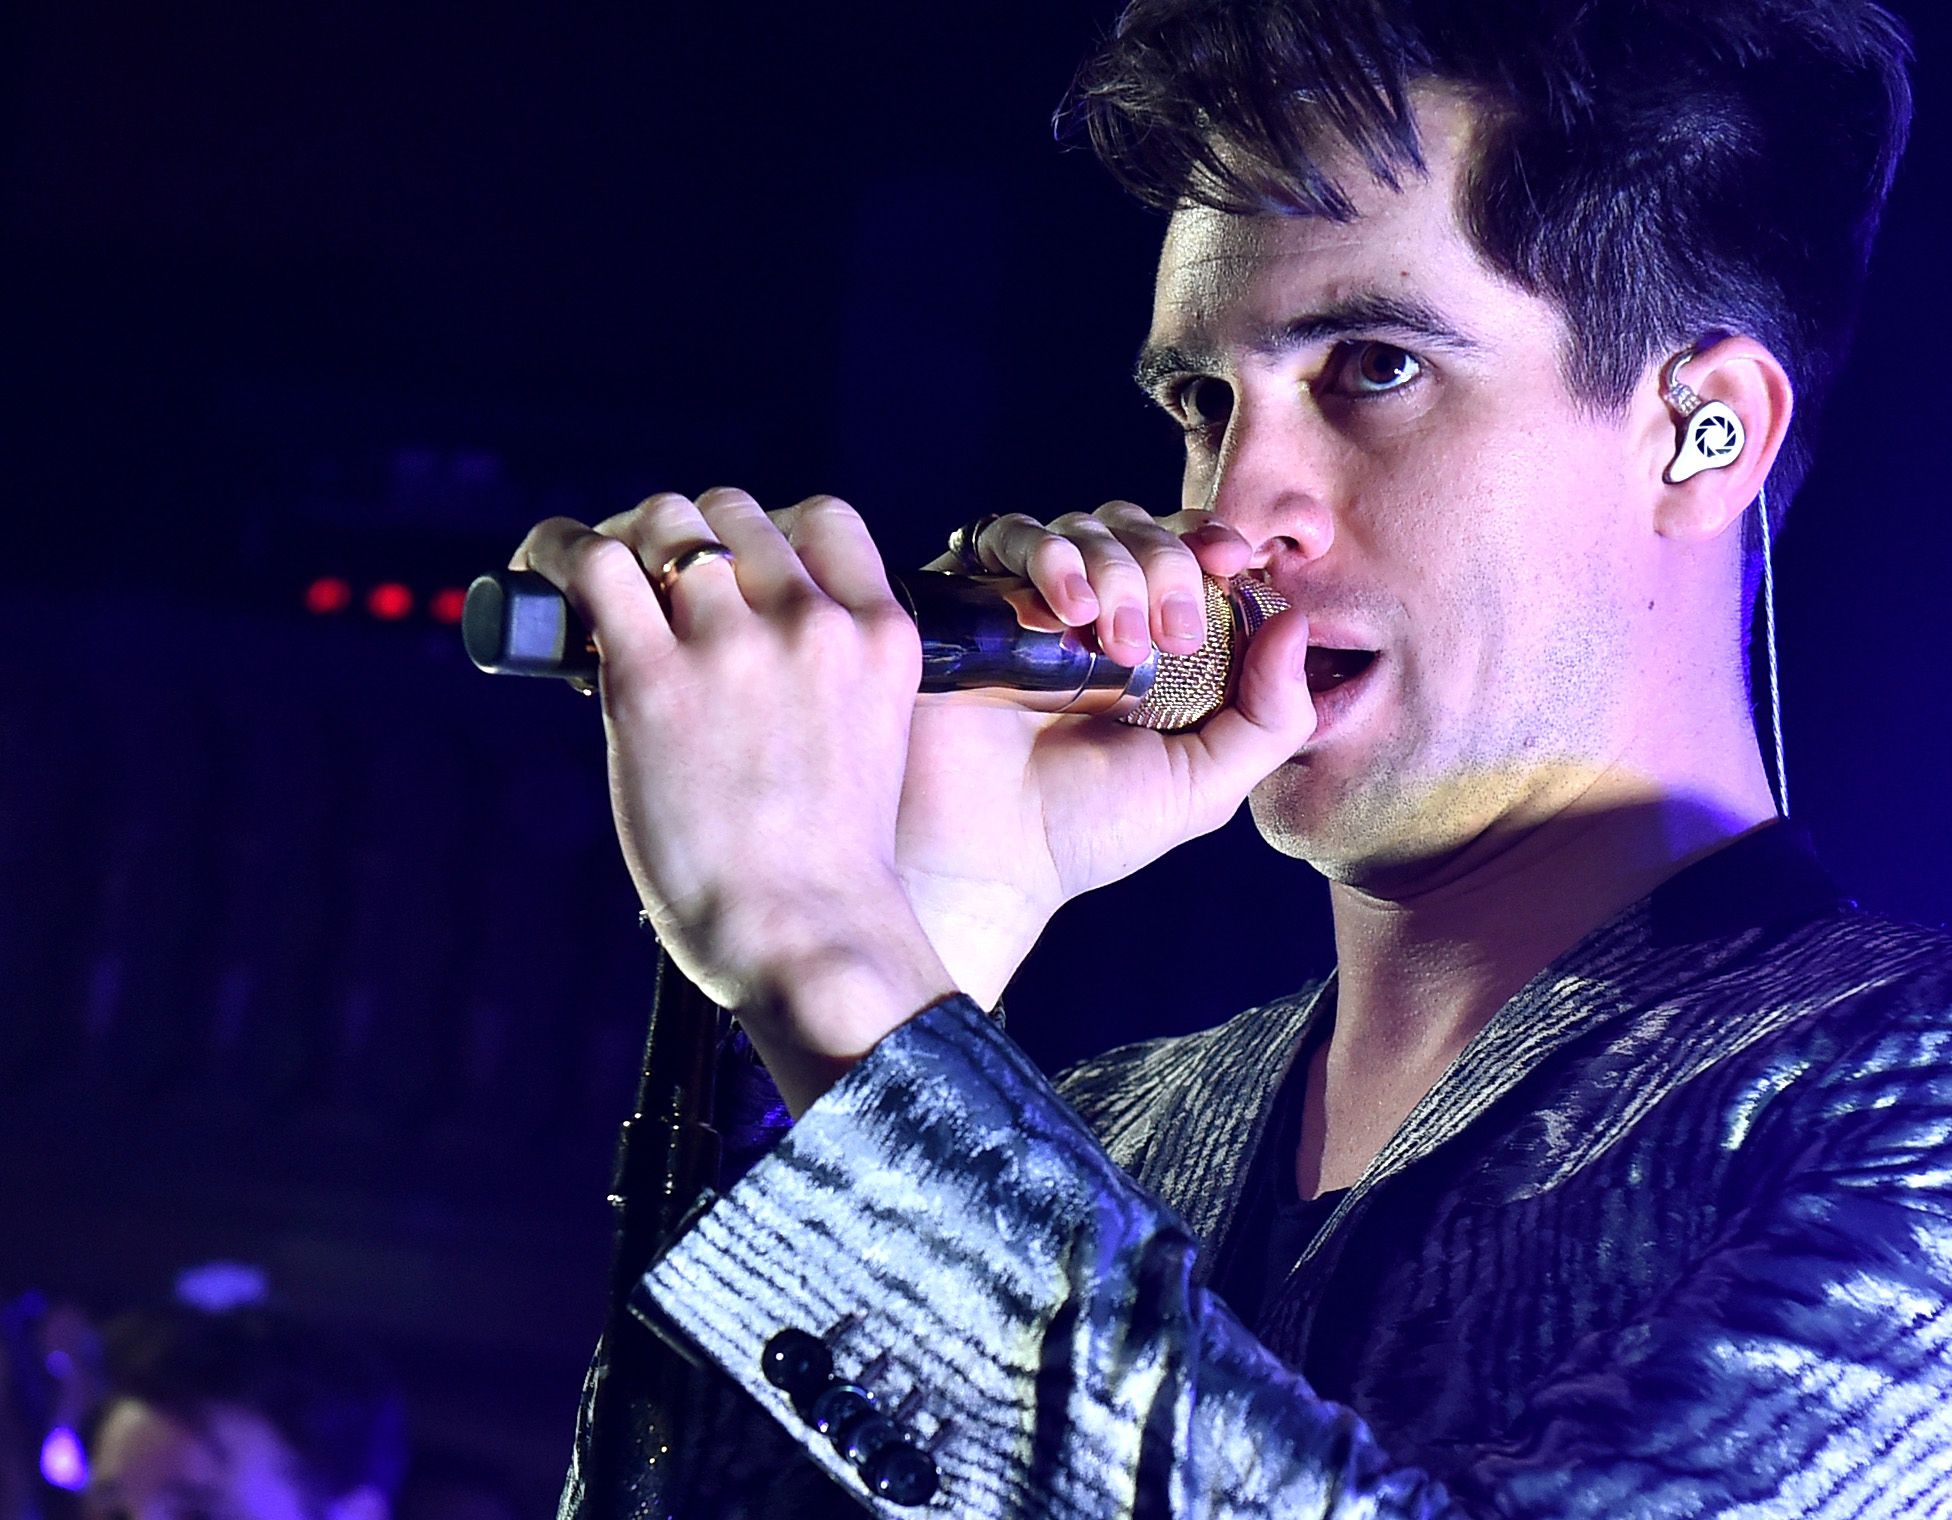 Brendon Urie Net Worth Before Announcing Panic! At The Disco Breakup